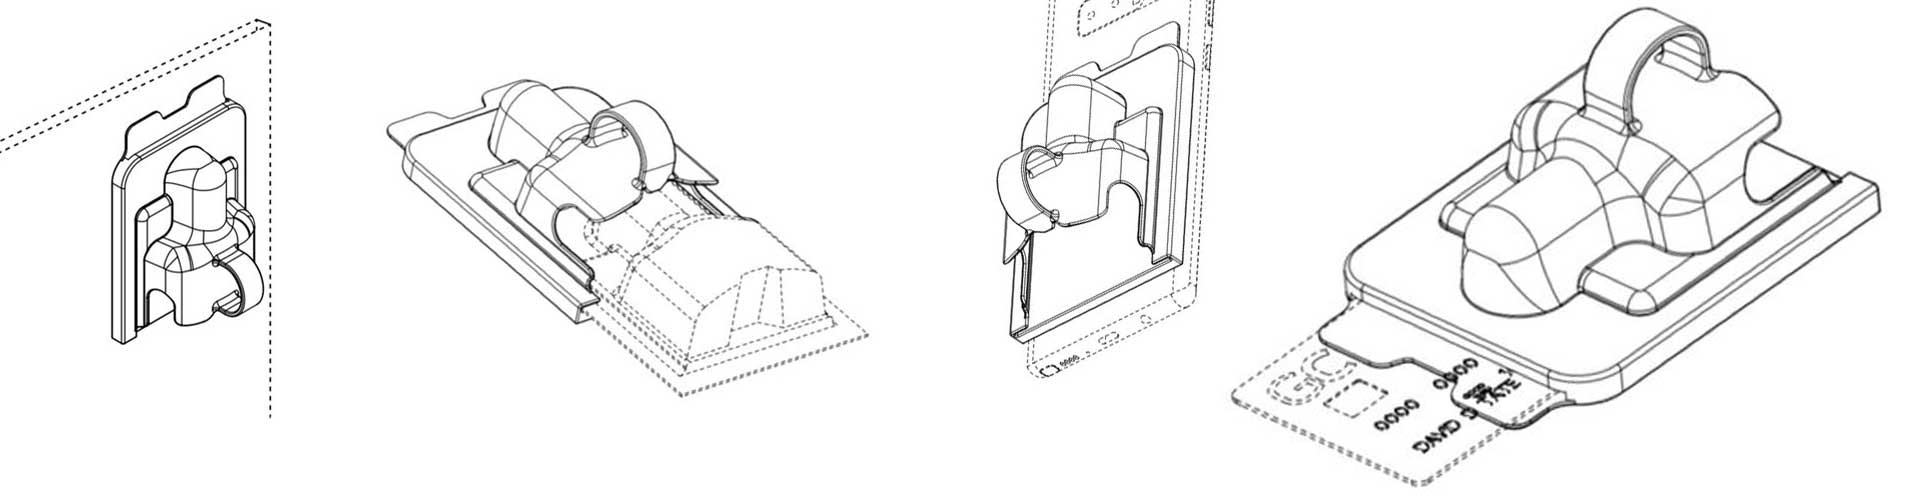 narcan holder patent drawing banner